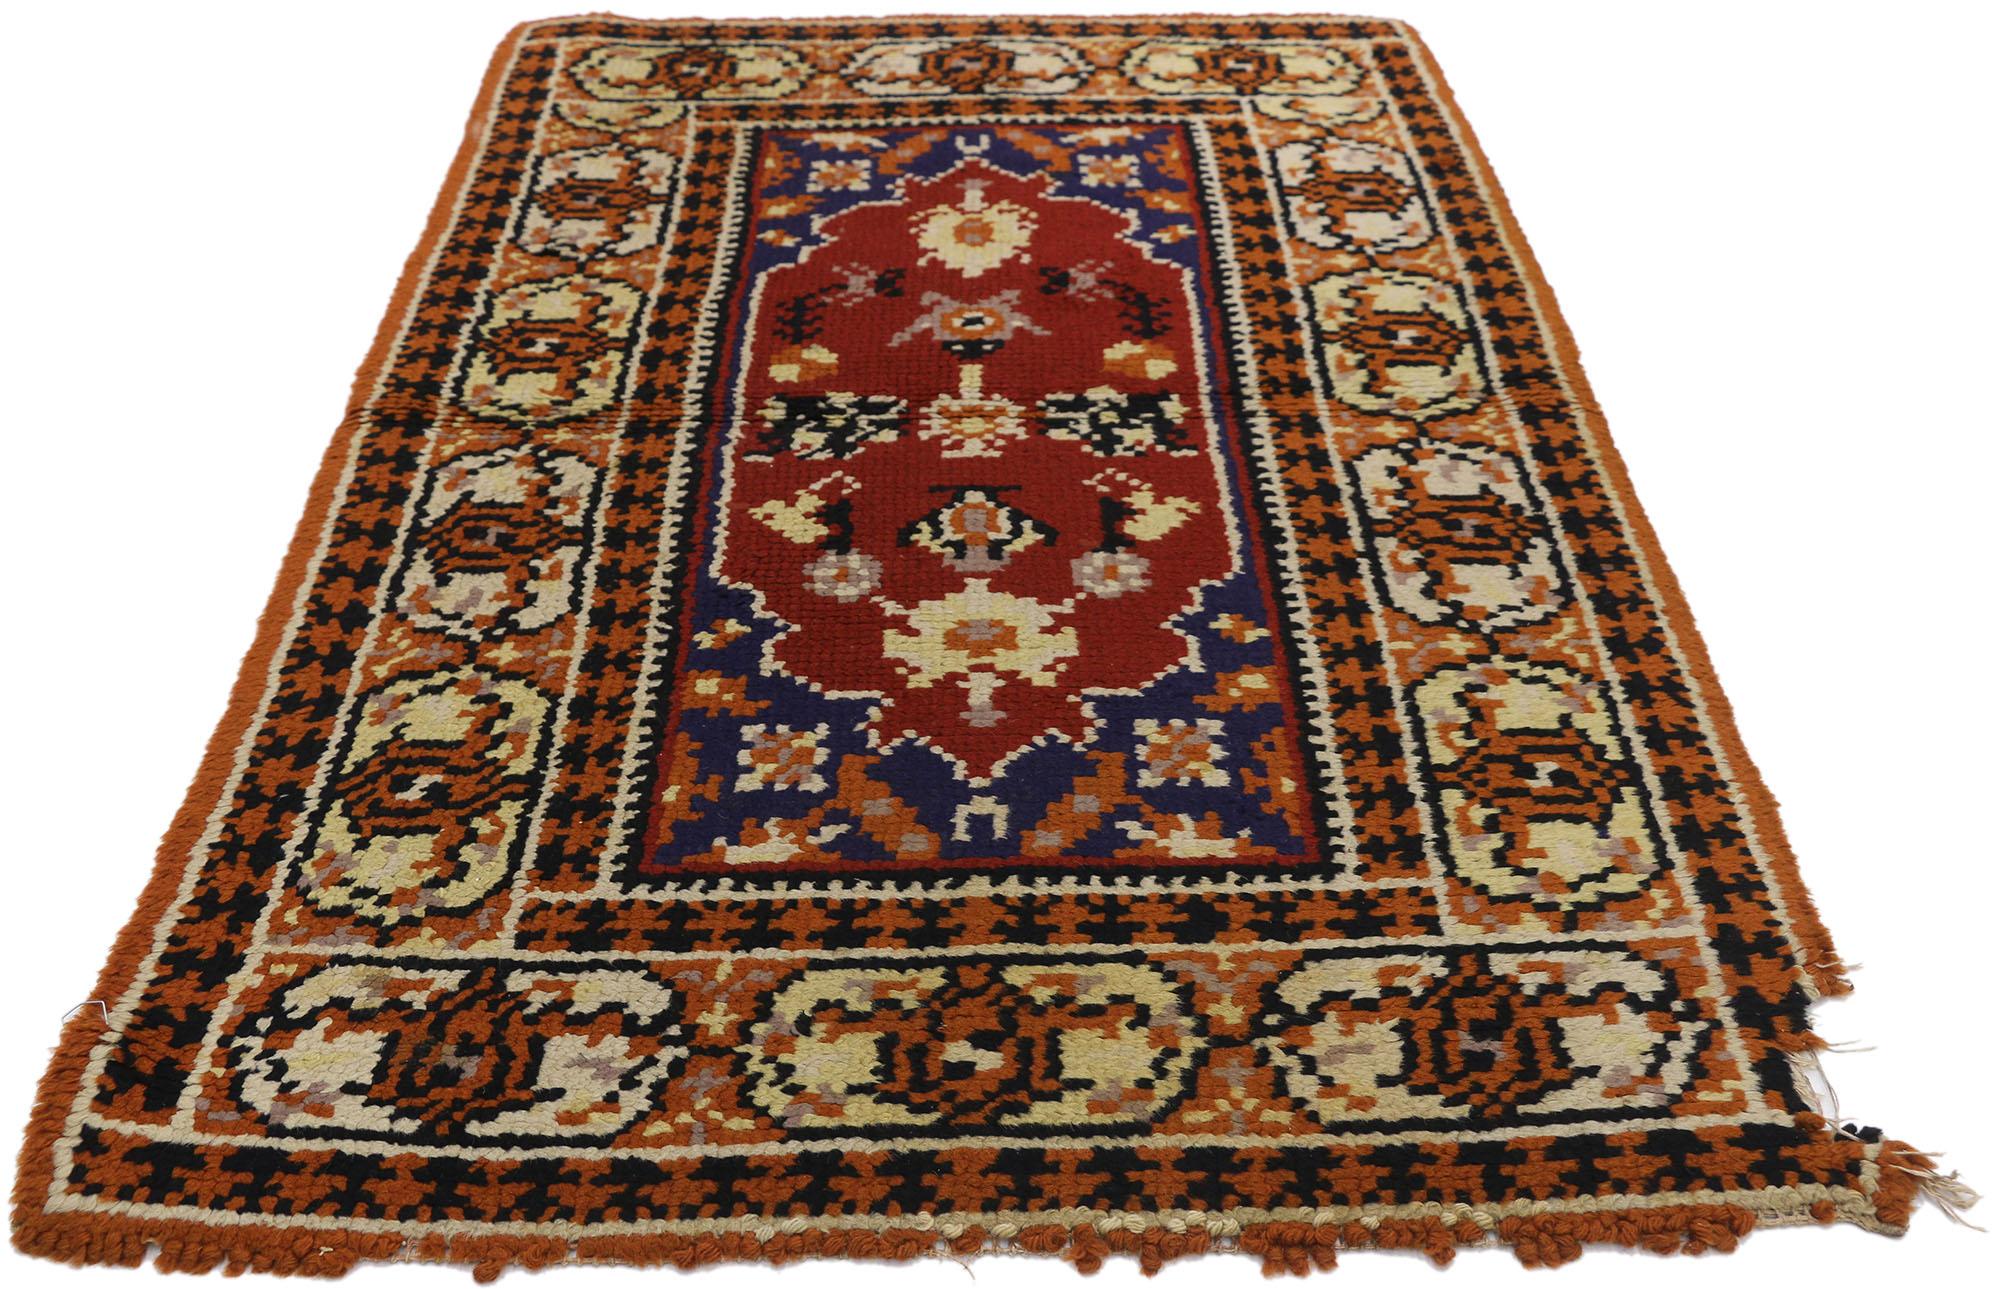 Spanish Colonial Vintage European Rug For Sale